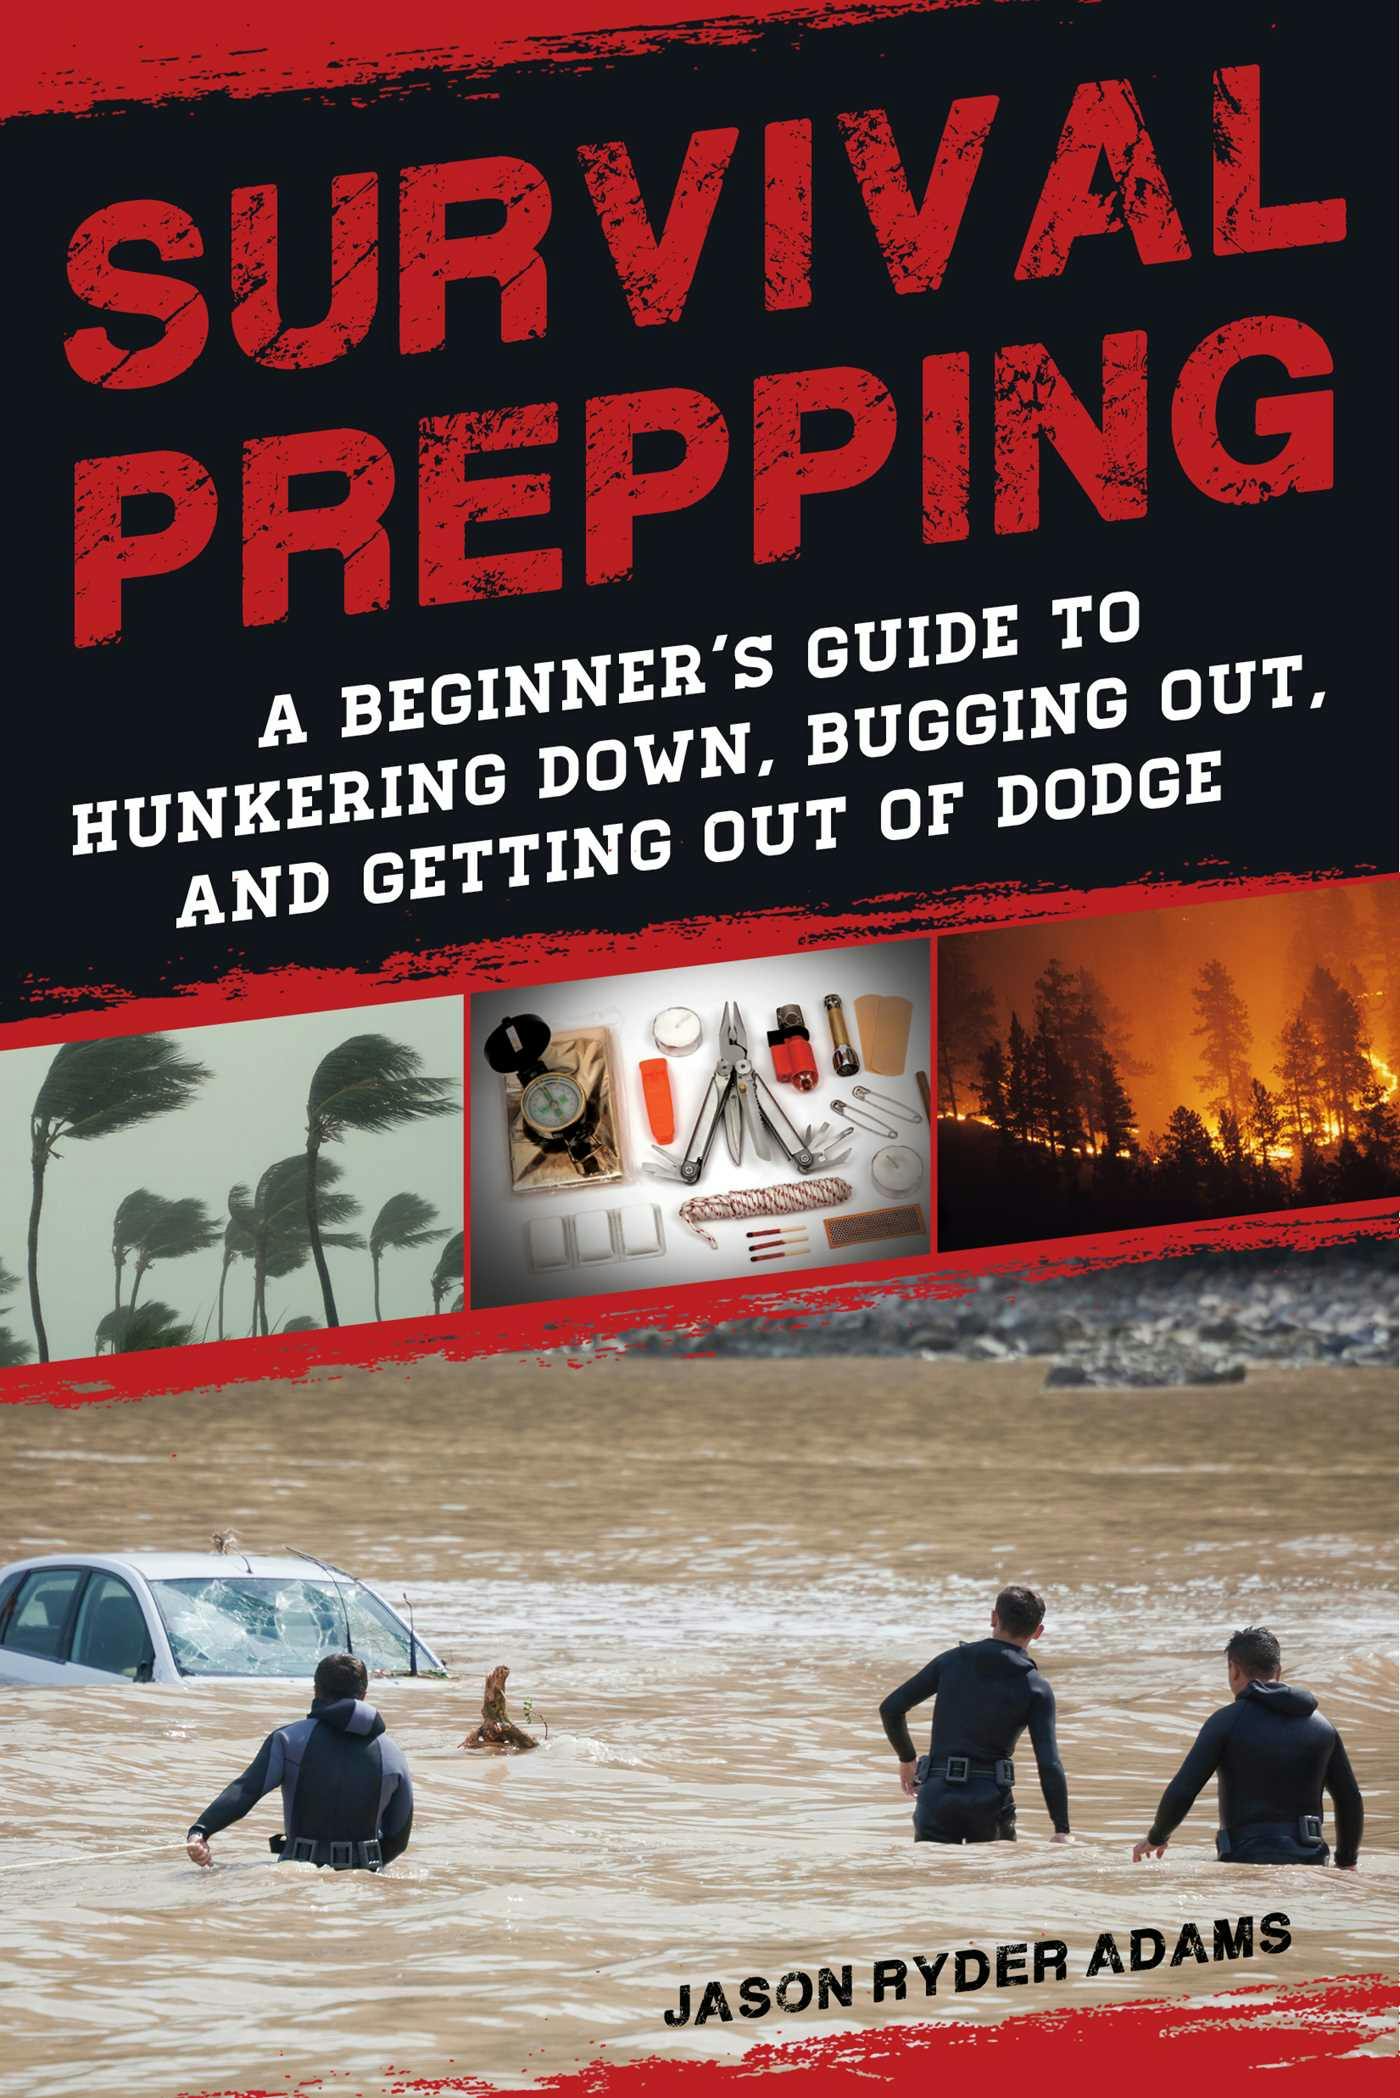 Survival Prepping: A Guide to Hunkering Down, Bugging Out, and Getting Out of Dodge - Jason Ryder Adams